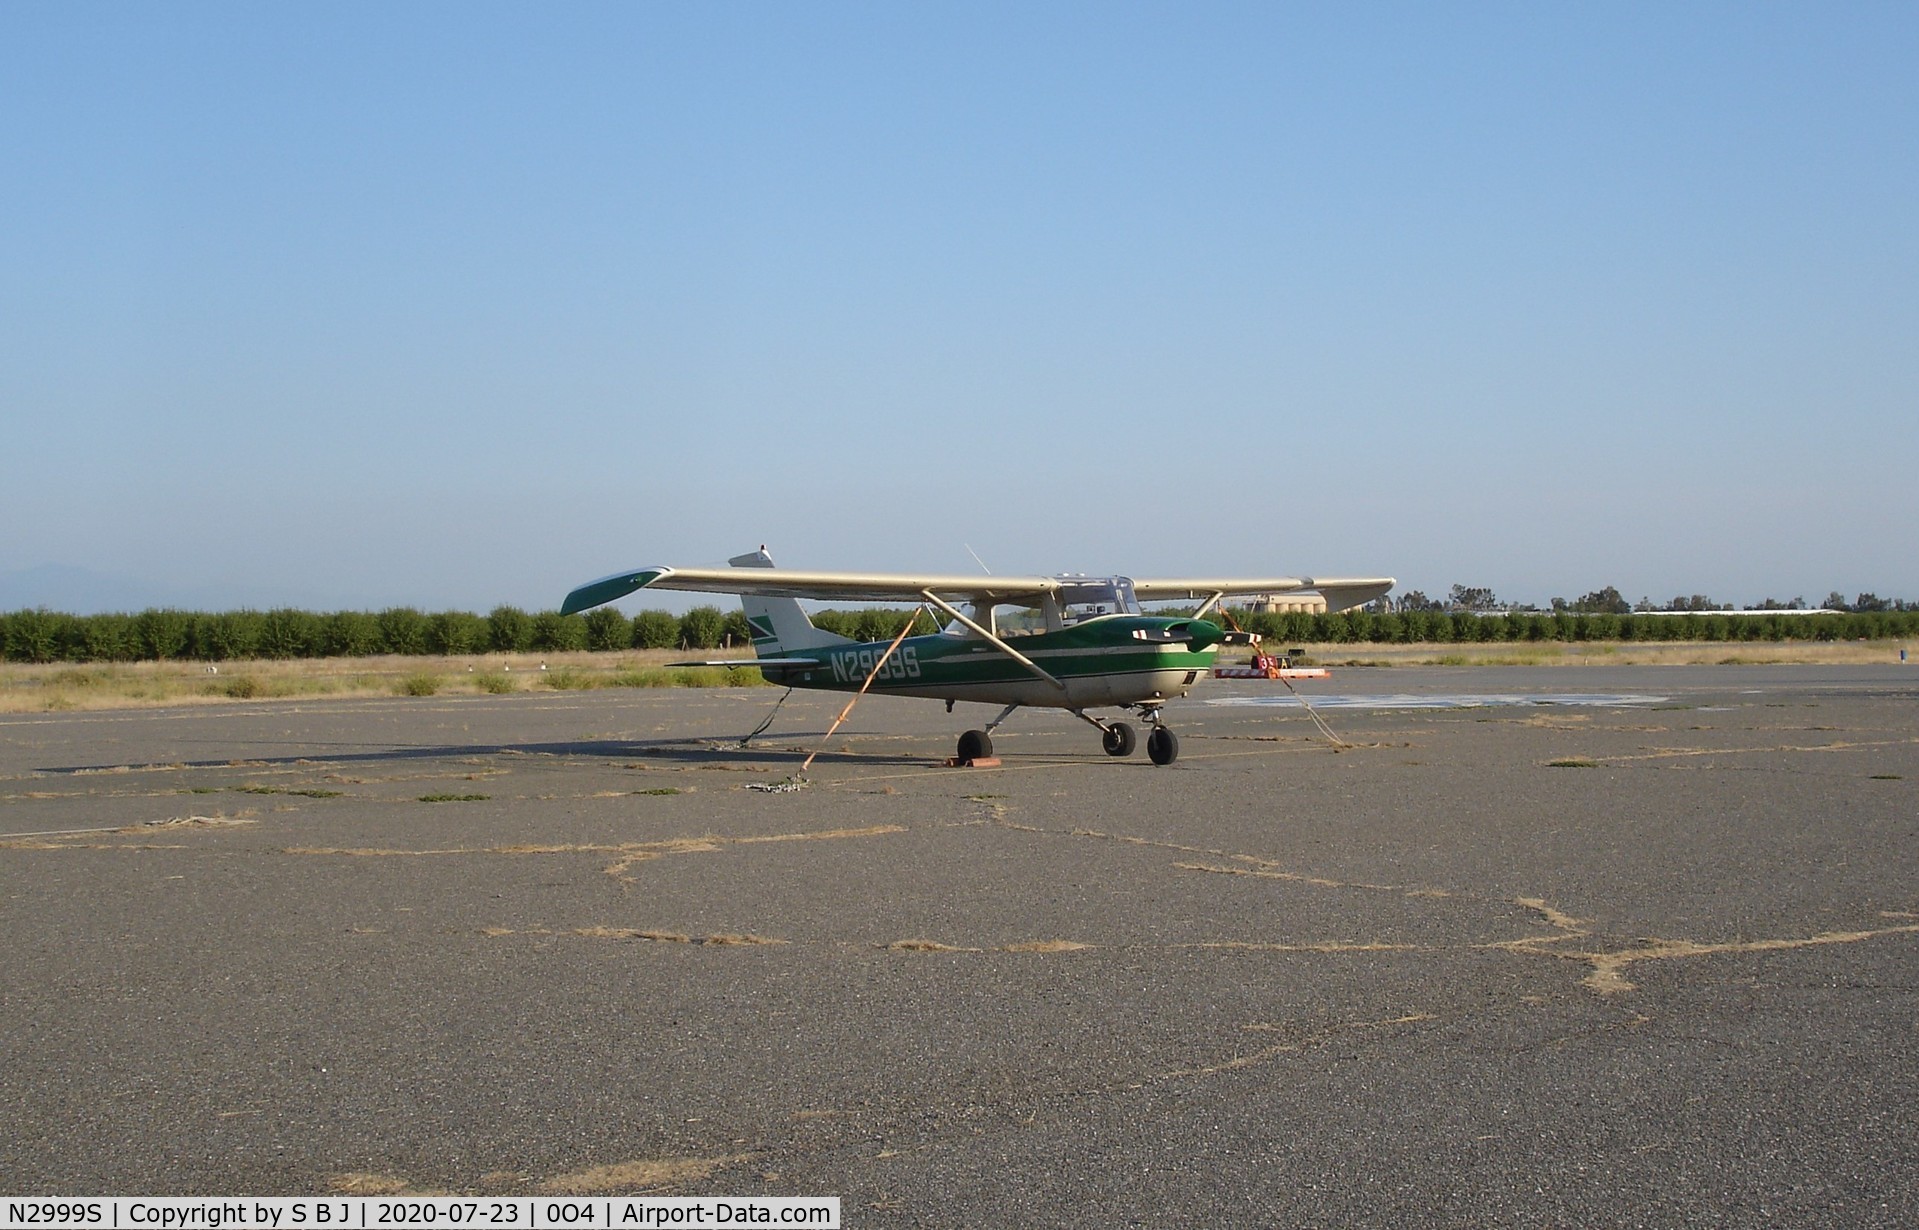 N2999S, 1967 Cessna 150G C/N 15066899, 99S during a recent visit to Corning.